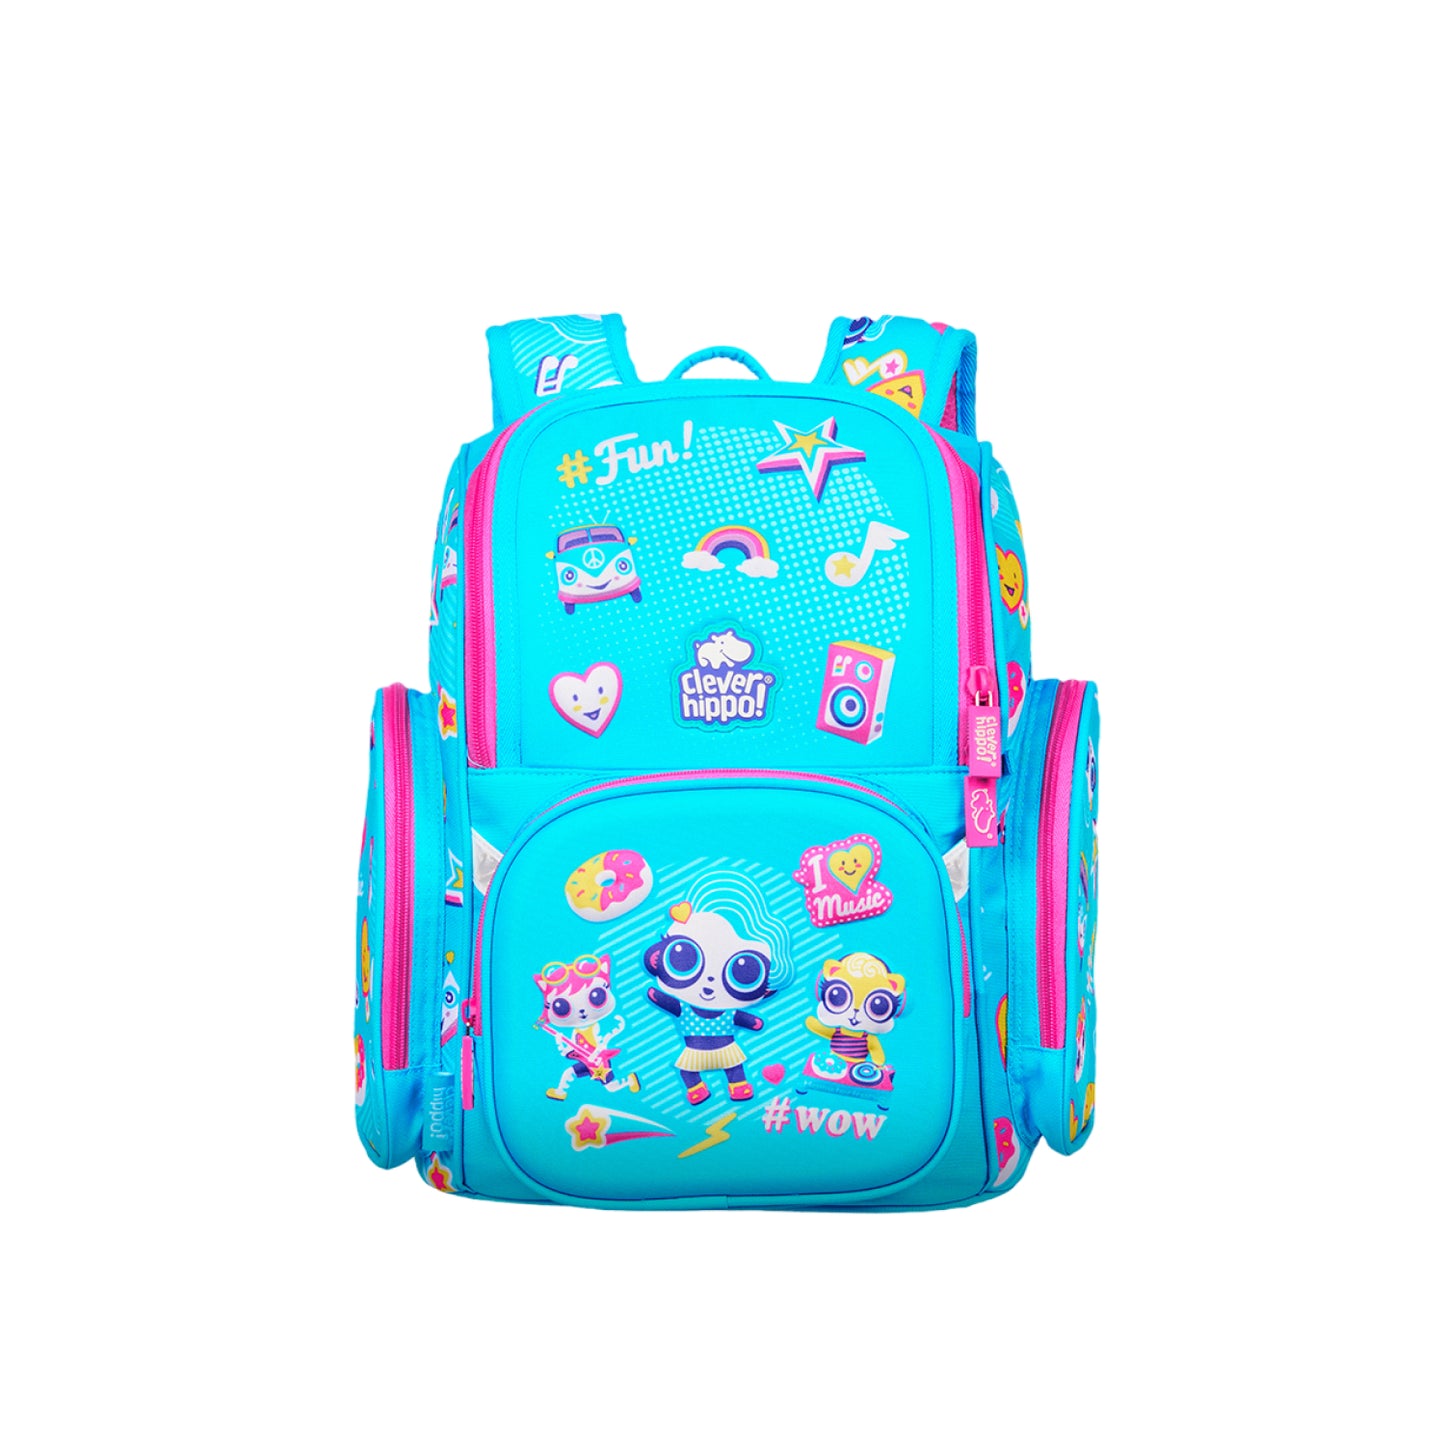 Fancy Backpack - Naughty Band CLEVERHIPPO BK1105